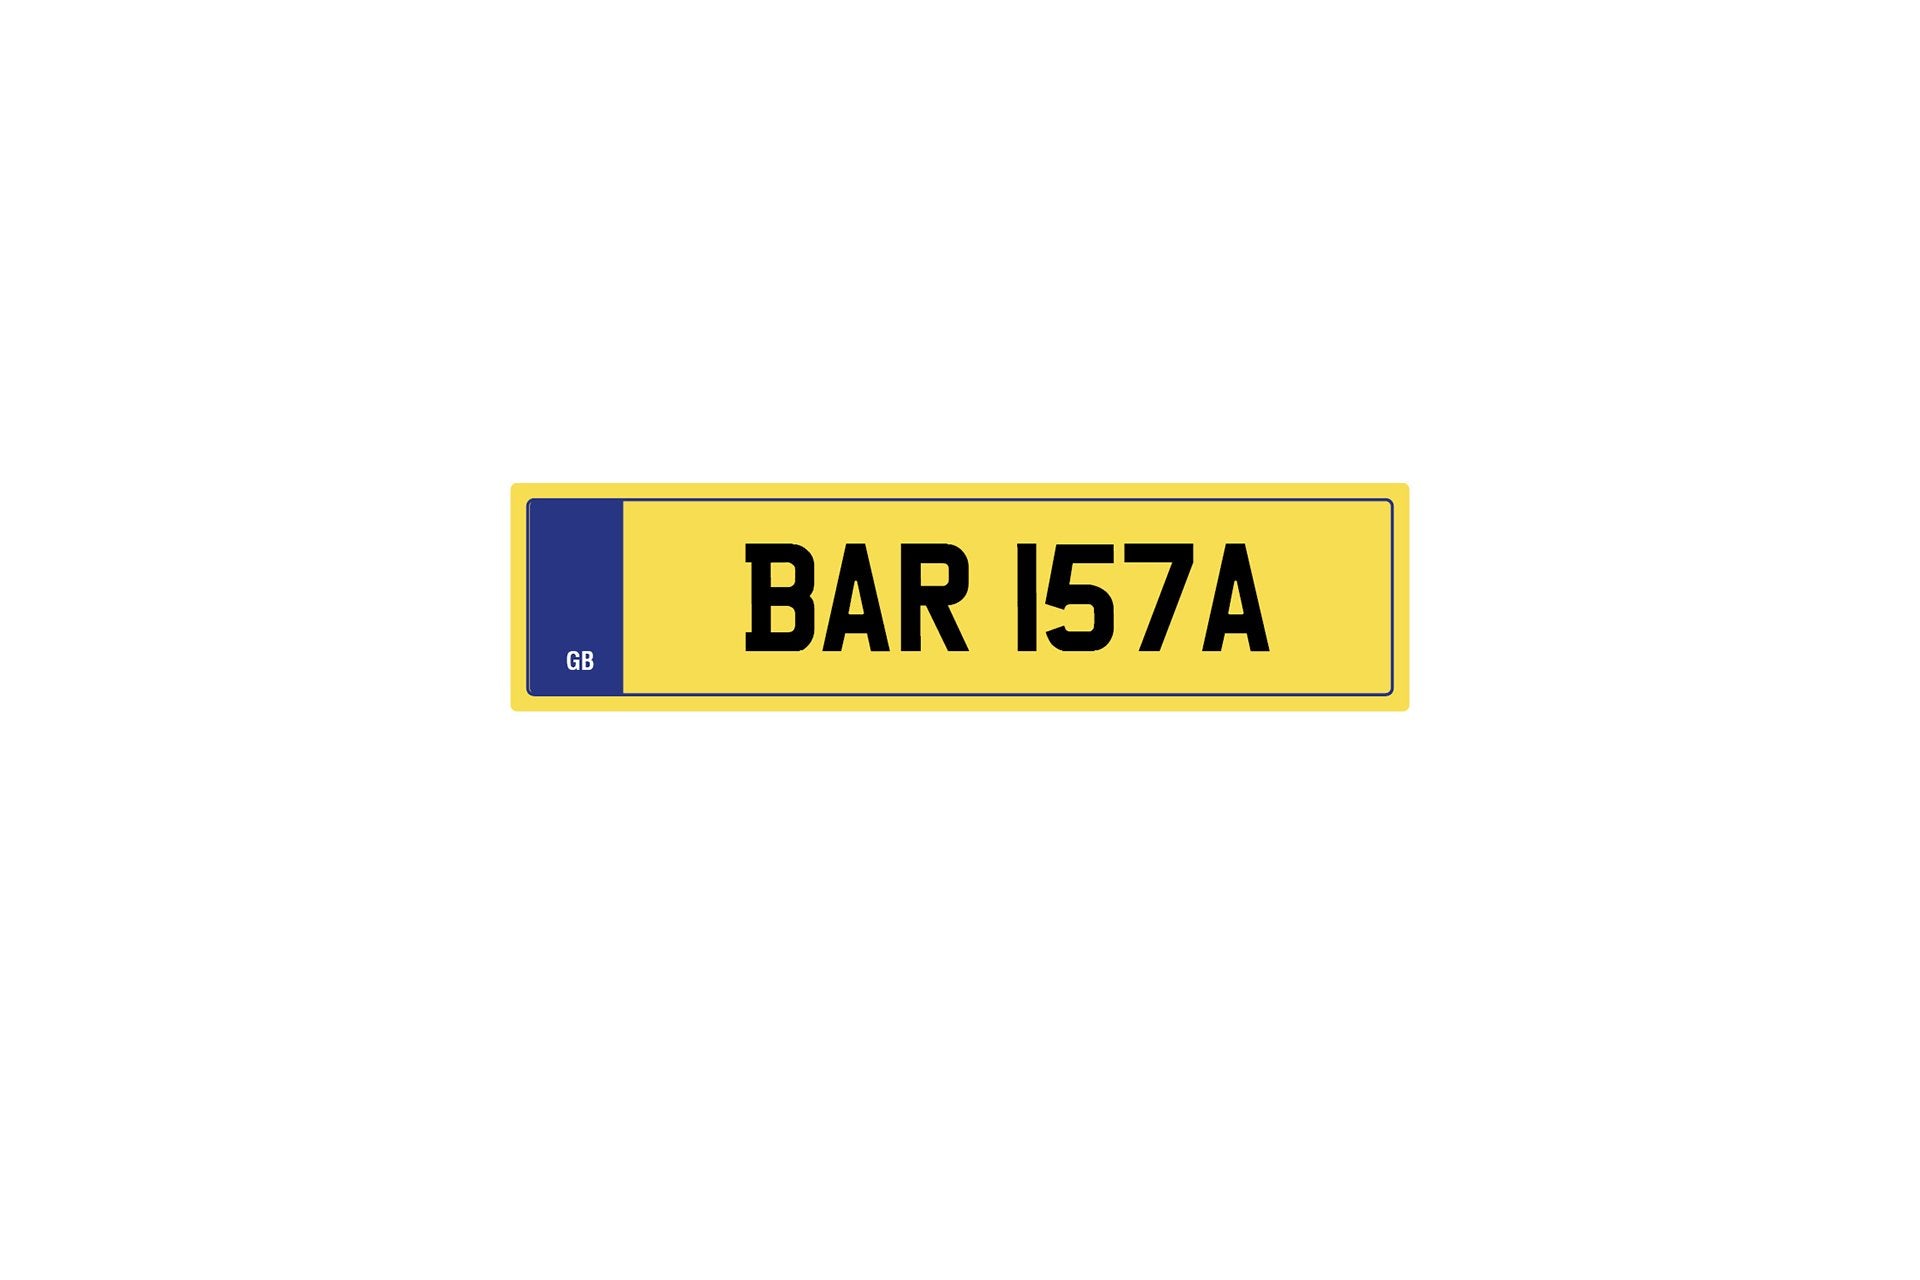 Private Plate Bar 157A by Kahn - Image 227